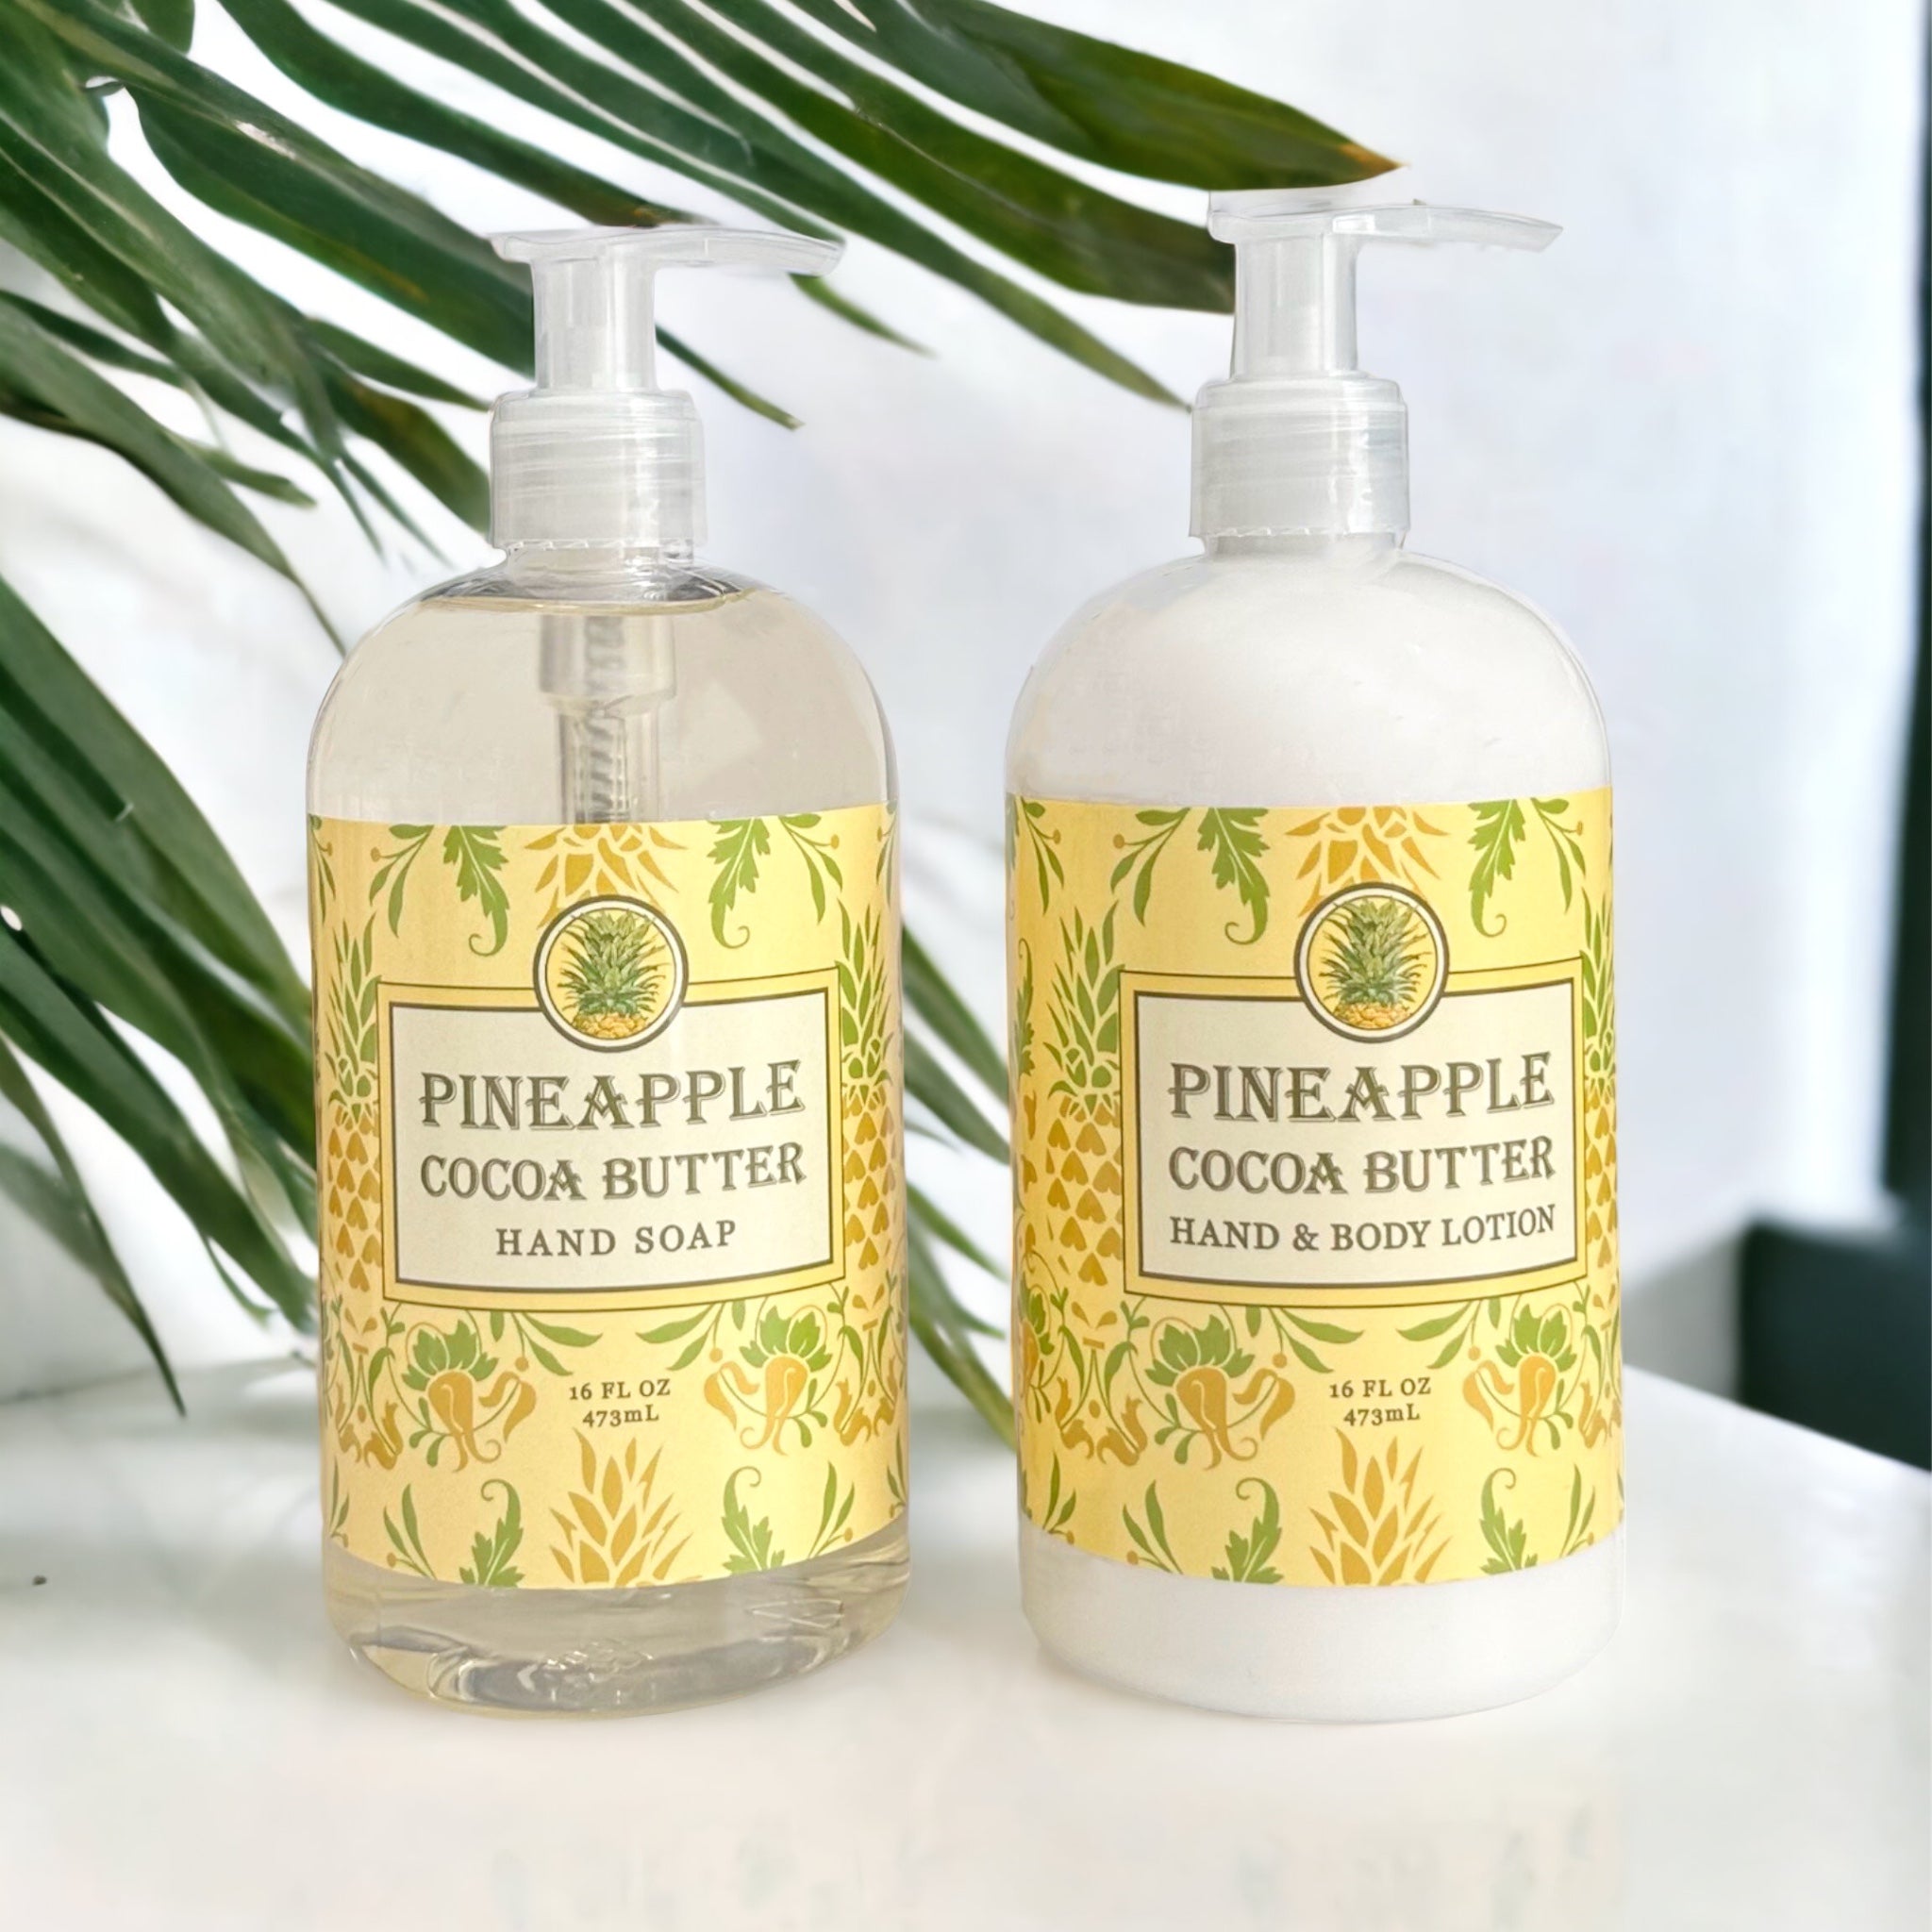 Greenwich Bay Taading Company Pineapple Cocoa Butter Collection